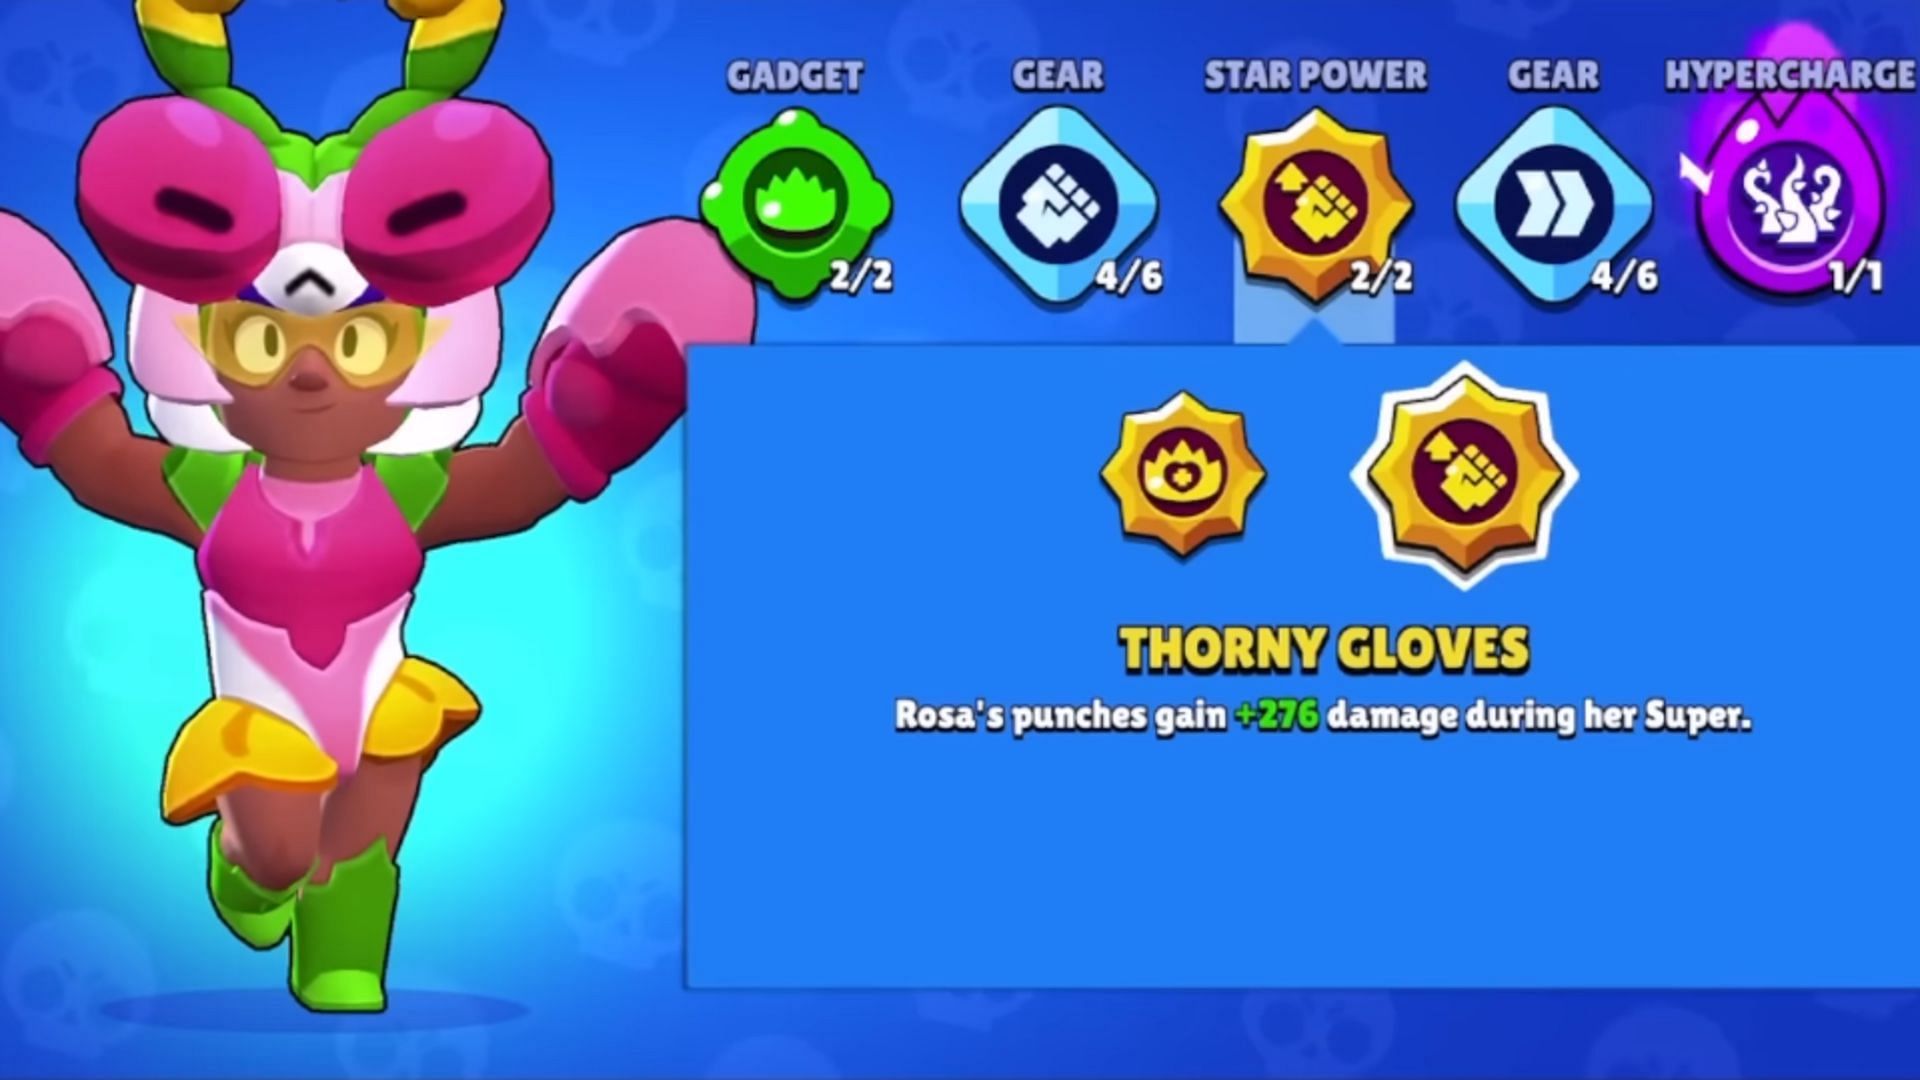 Thorny Gloves Star Power (Image via Supercell)